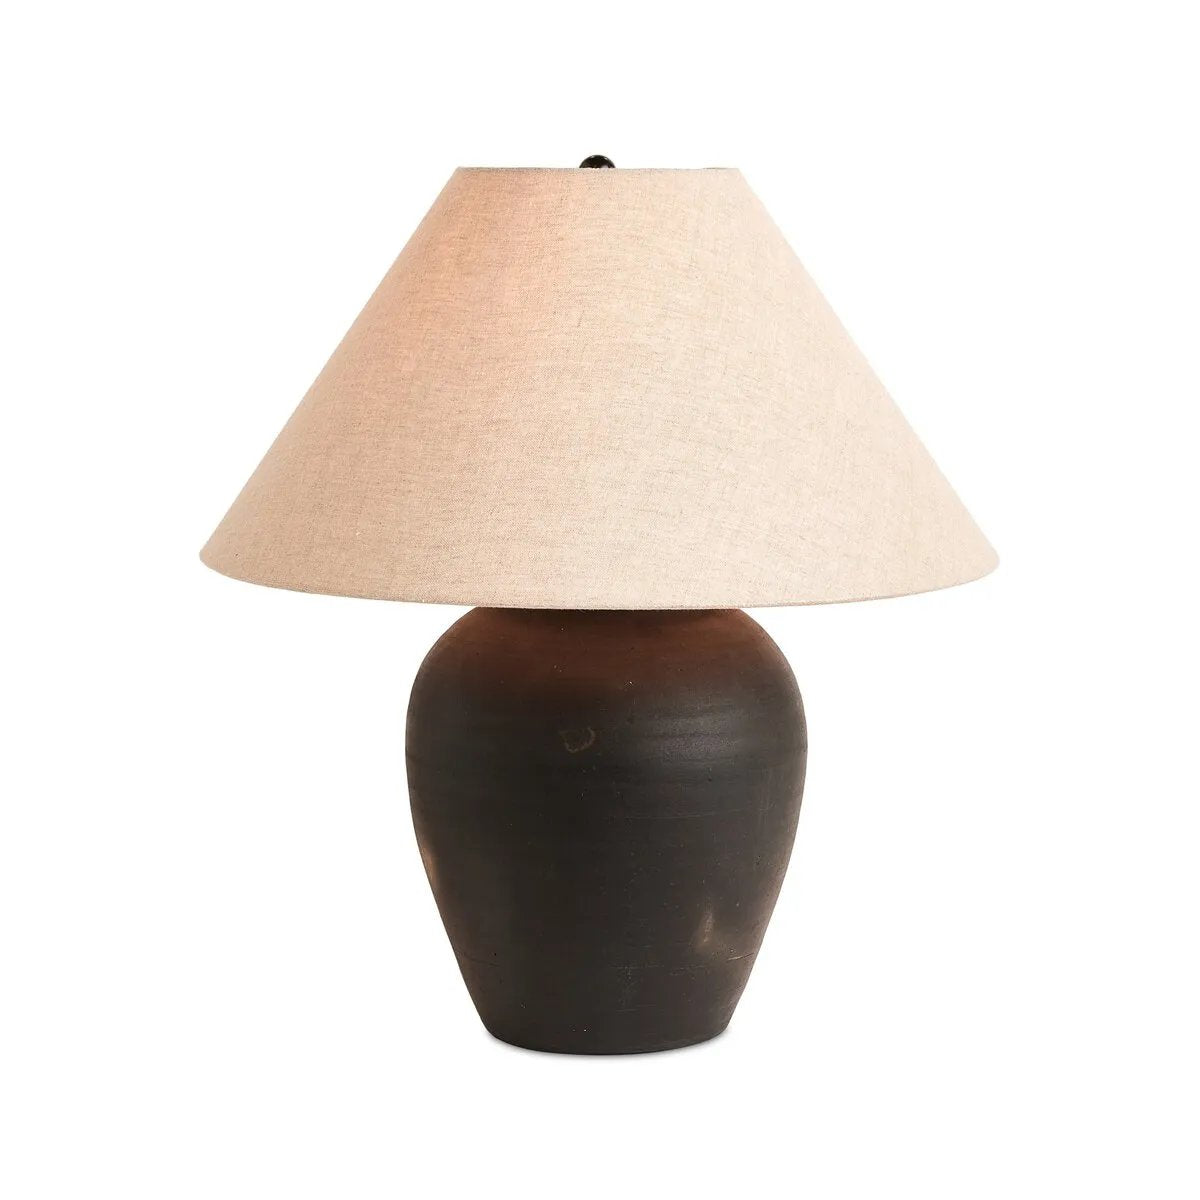 In this black terra cotta vase table lamp, each piece bears unique touches from its natural finishing process. Topped with a shade of natural linen, for a textural contrast.Collection: Rockwel Amethyst Home provides interior design, new home construction design consulting, vintage area rugs, and lighting in the Nashville metro area.